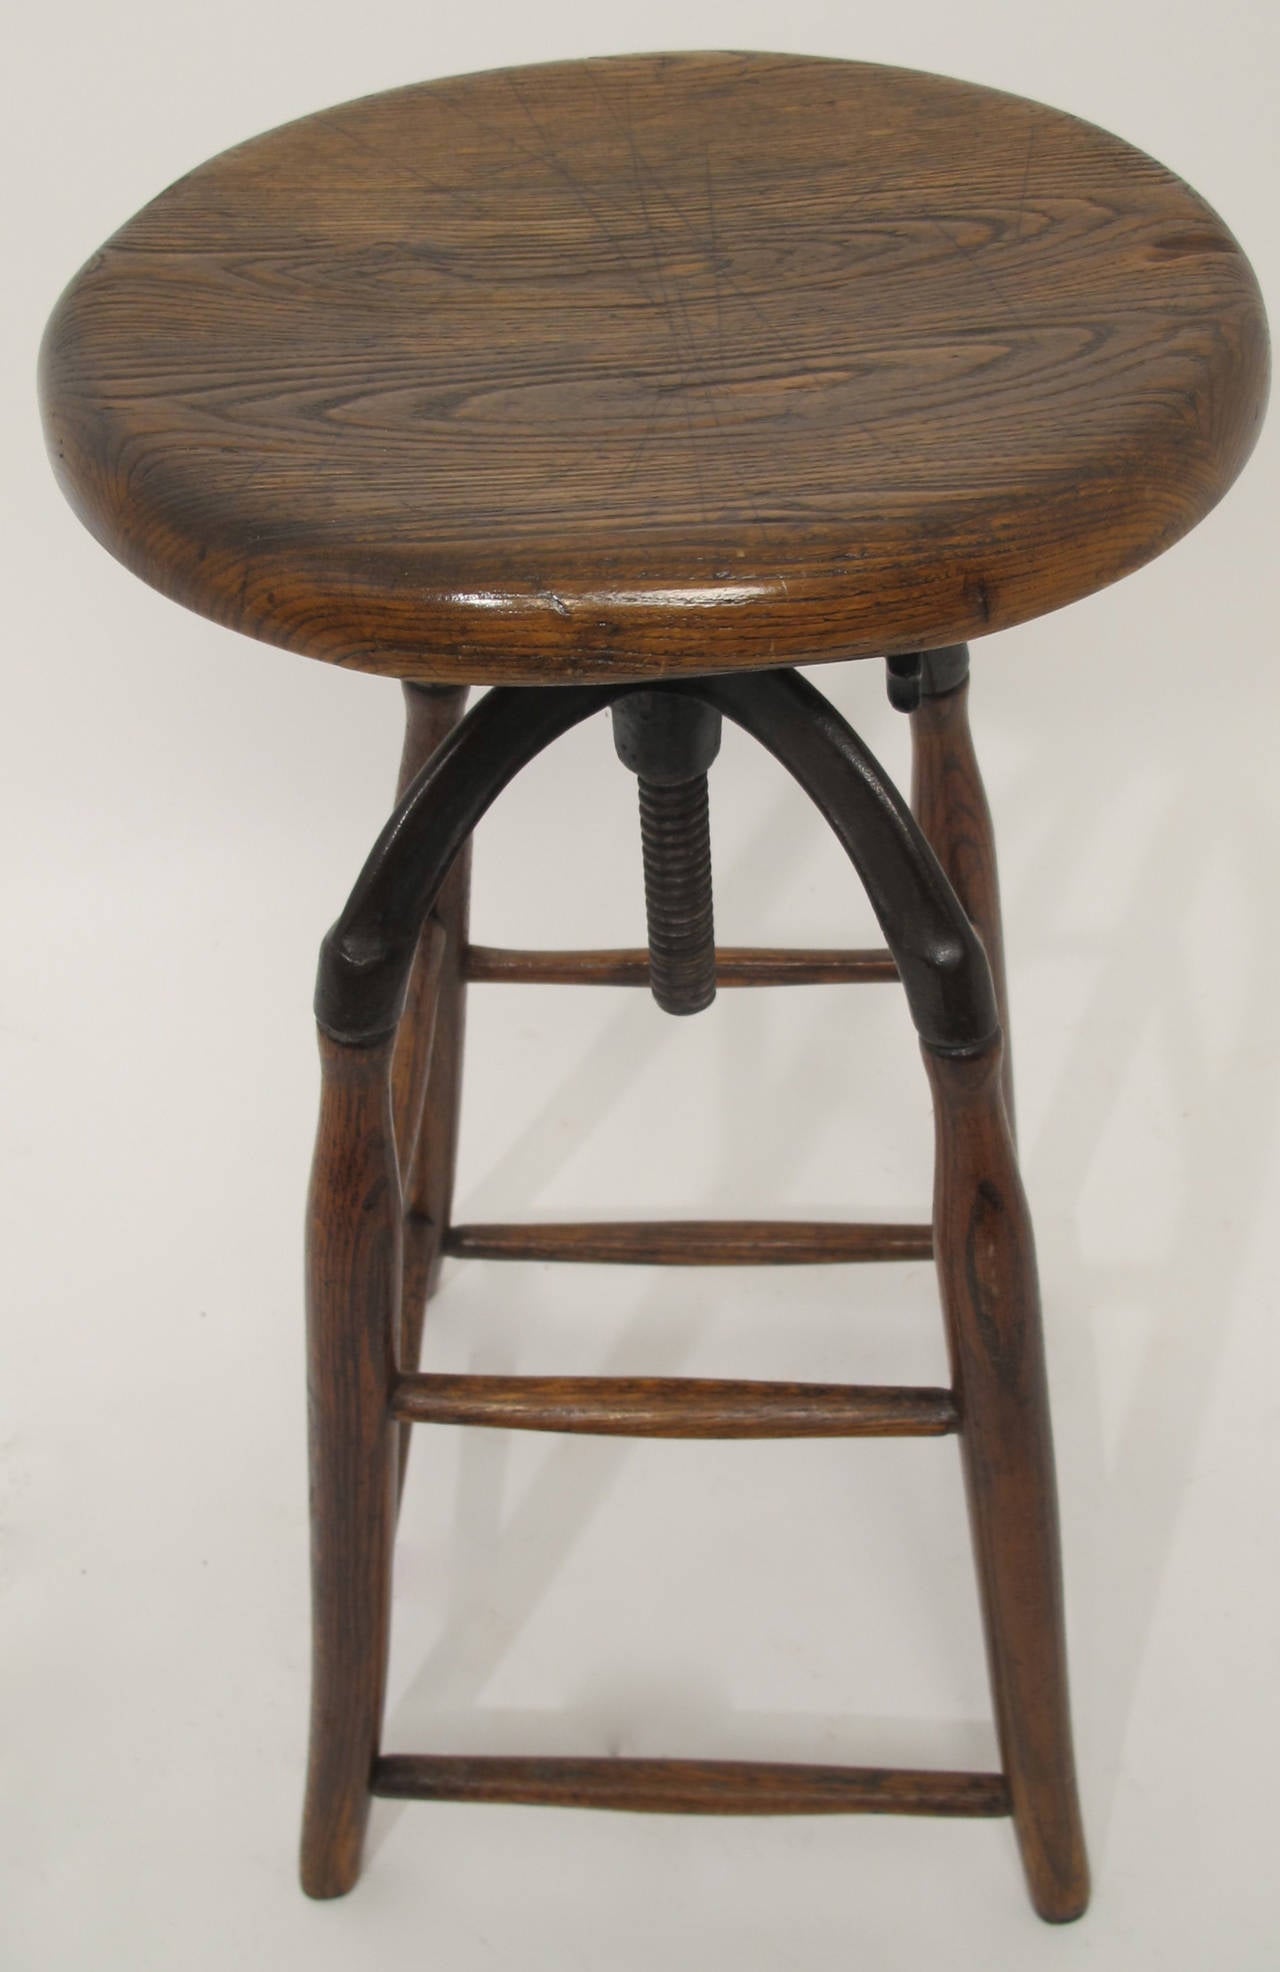 Great American Oak and Black Iron Industrial Stool with adjustable seat height and swivel stop.  Both are functioning.  All original.  Seat Height is adjustable up to 34